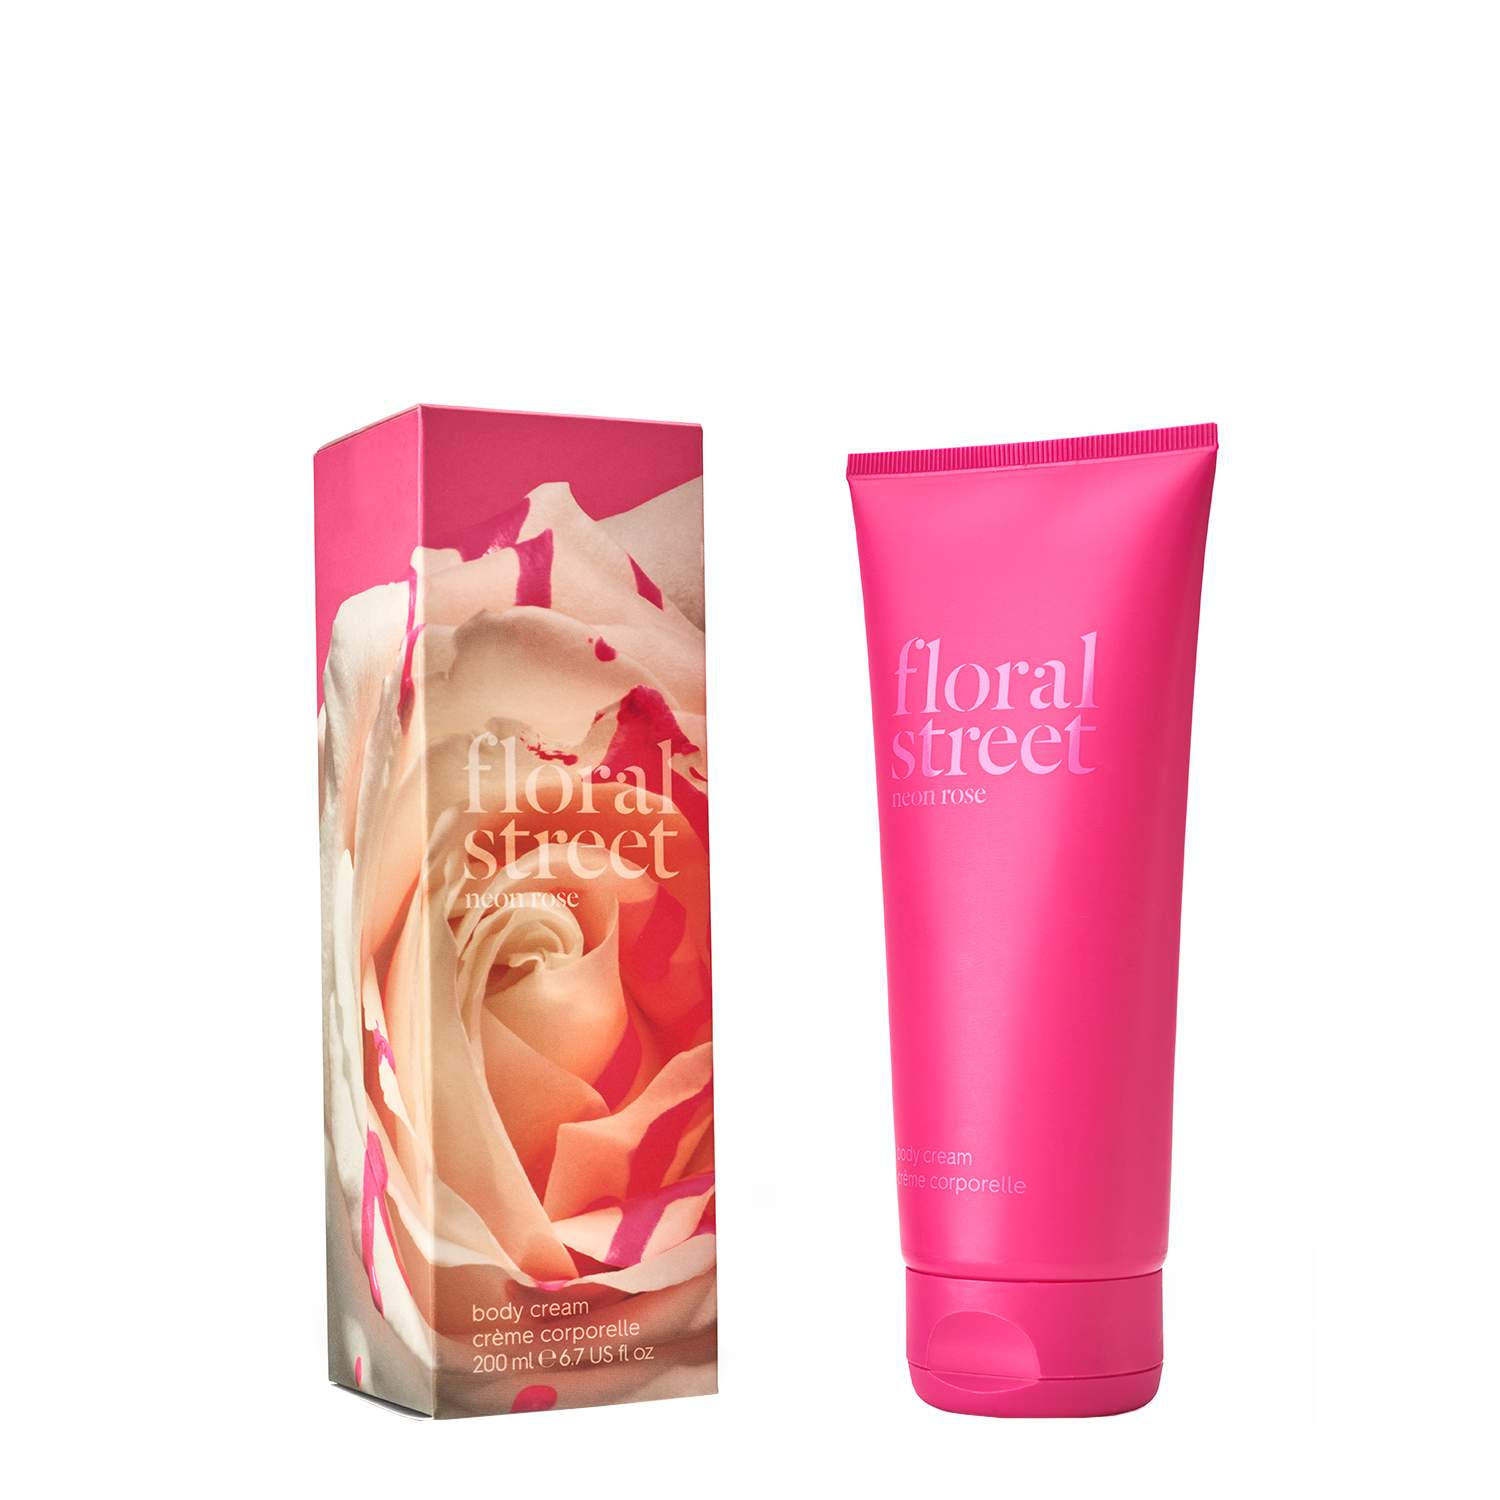 Floral Street Neon Rose Body Cream Floral Street Neon Rose Body Cream 1